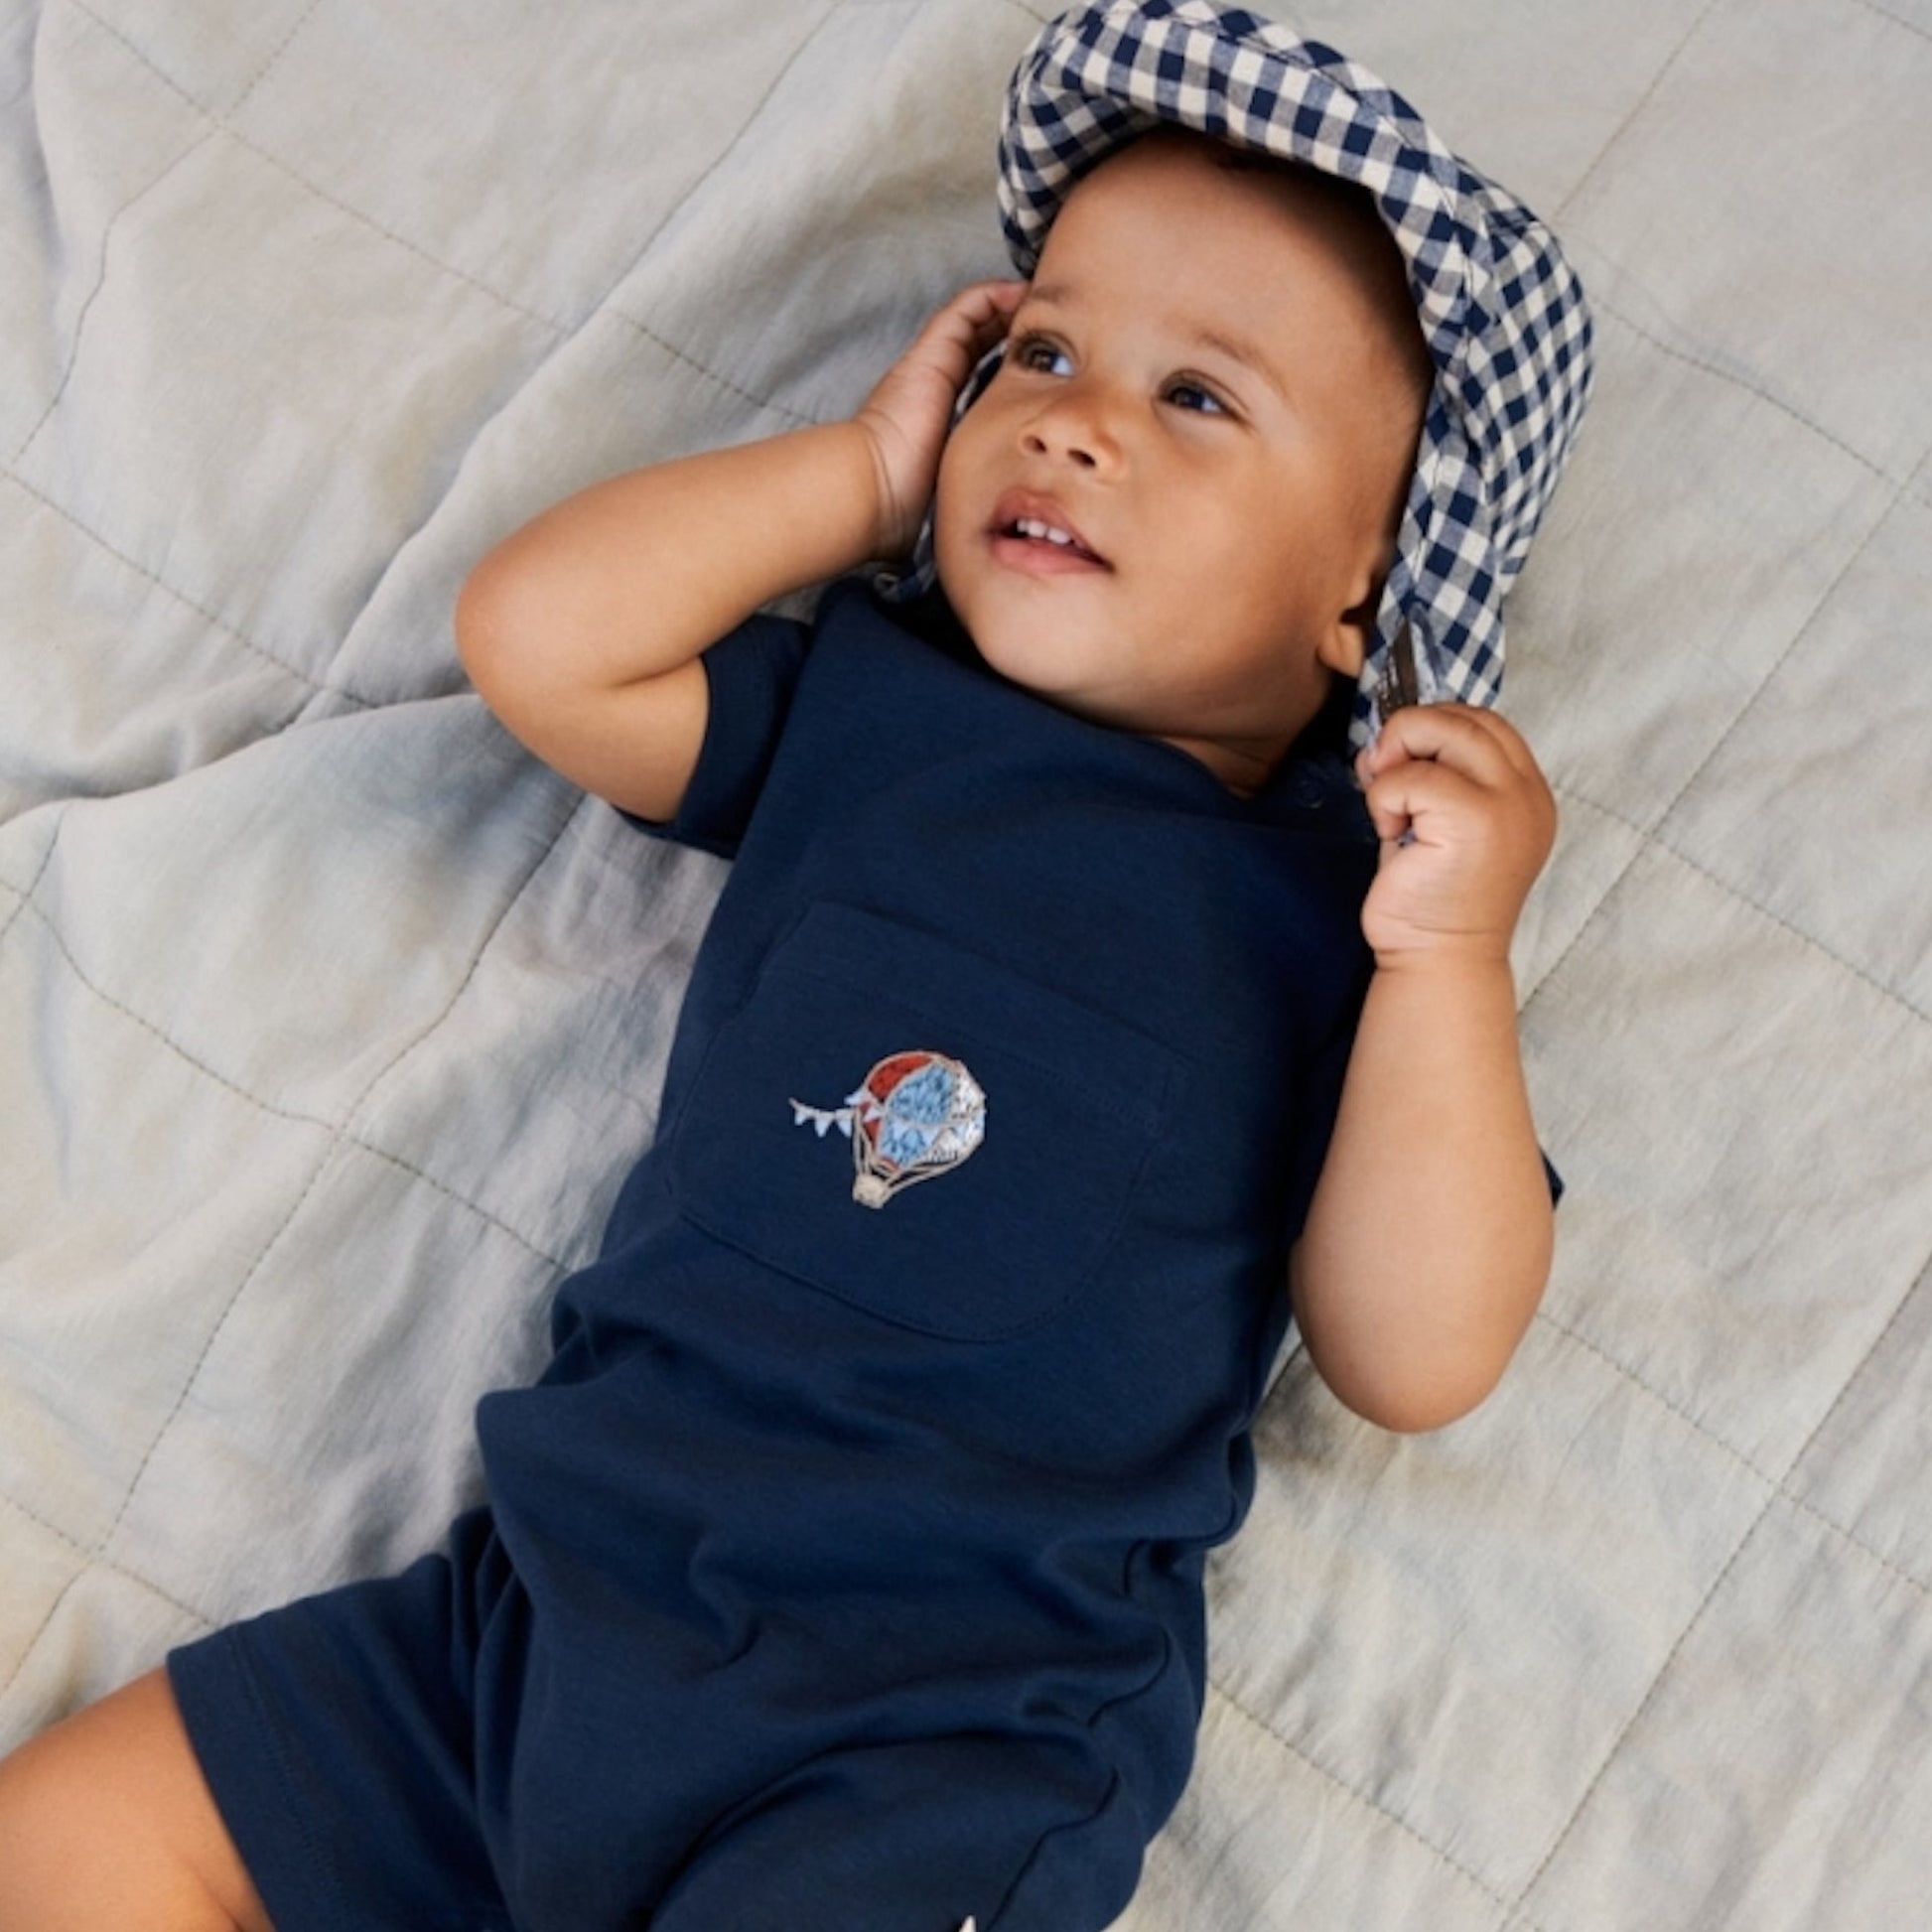 Wheat 'Asmus' S/S Baby Playsuit - Blue Waves